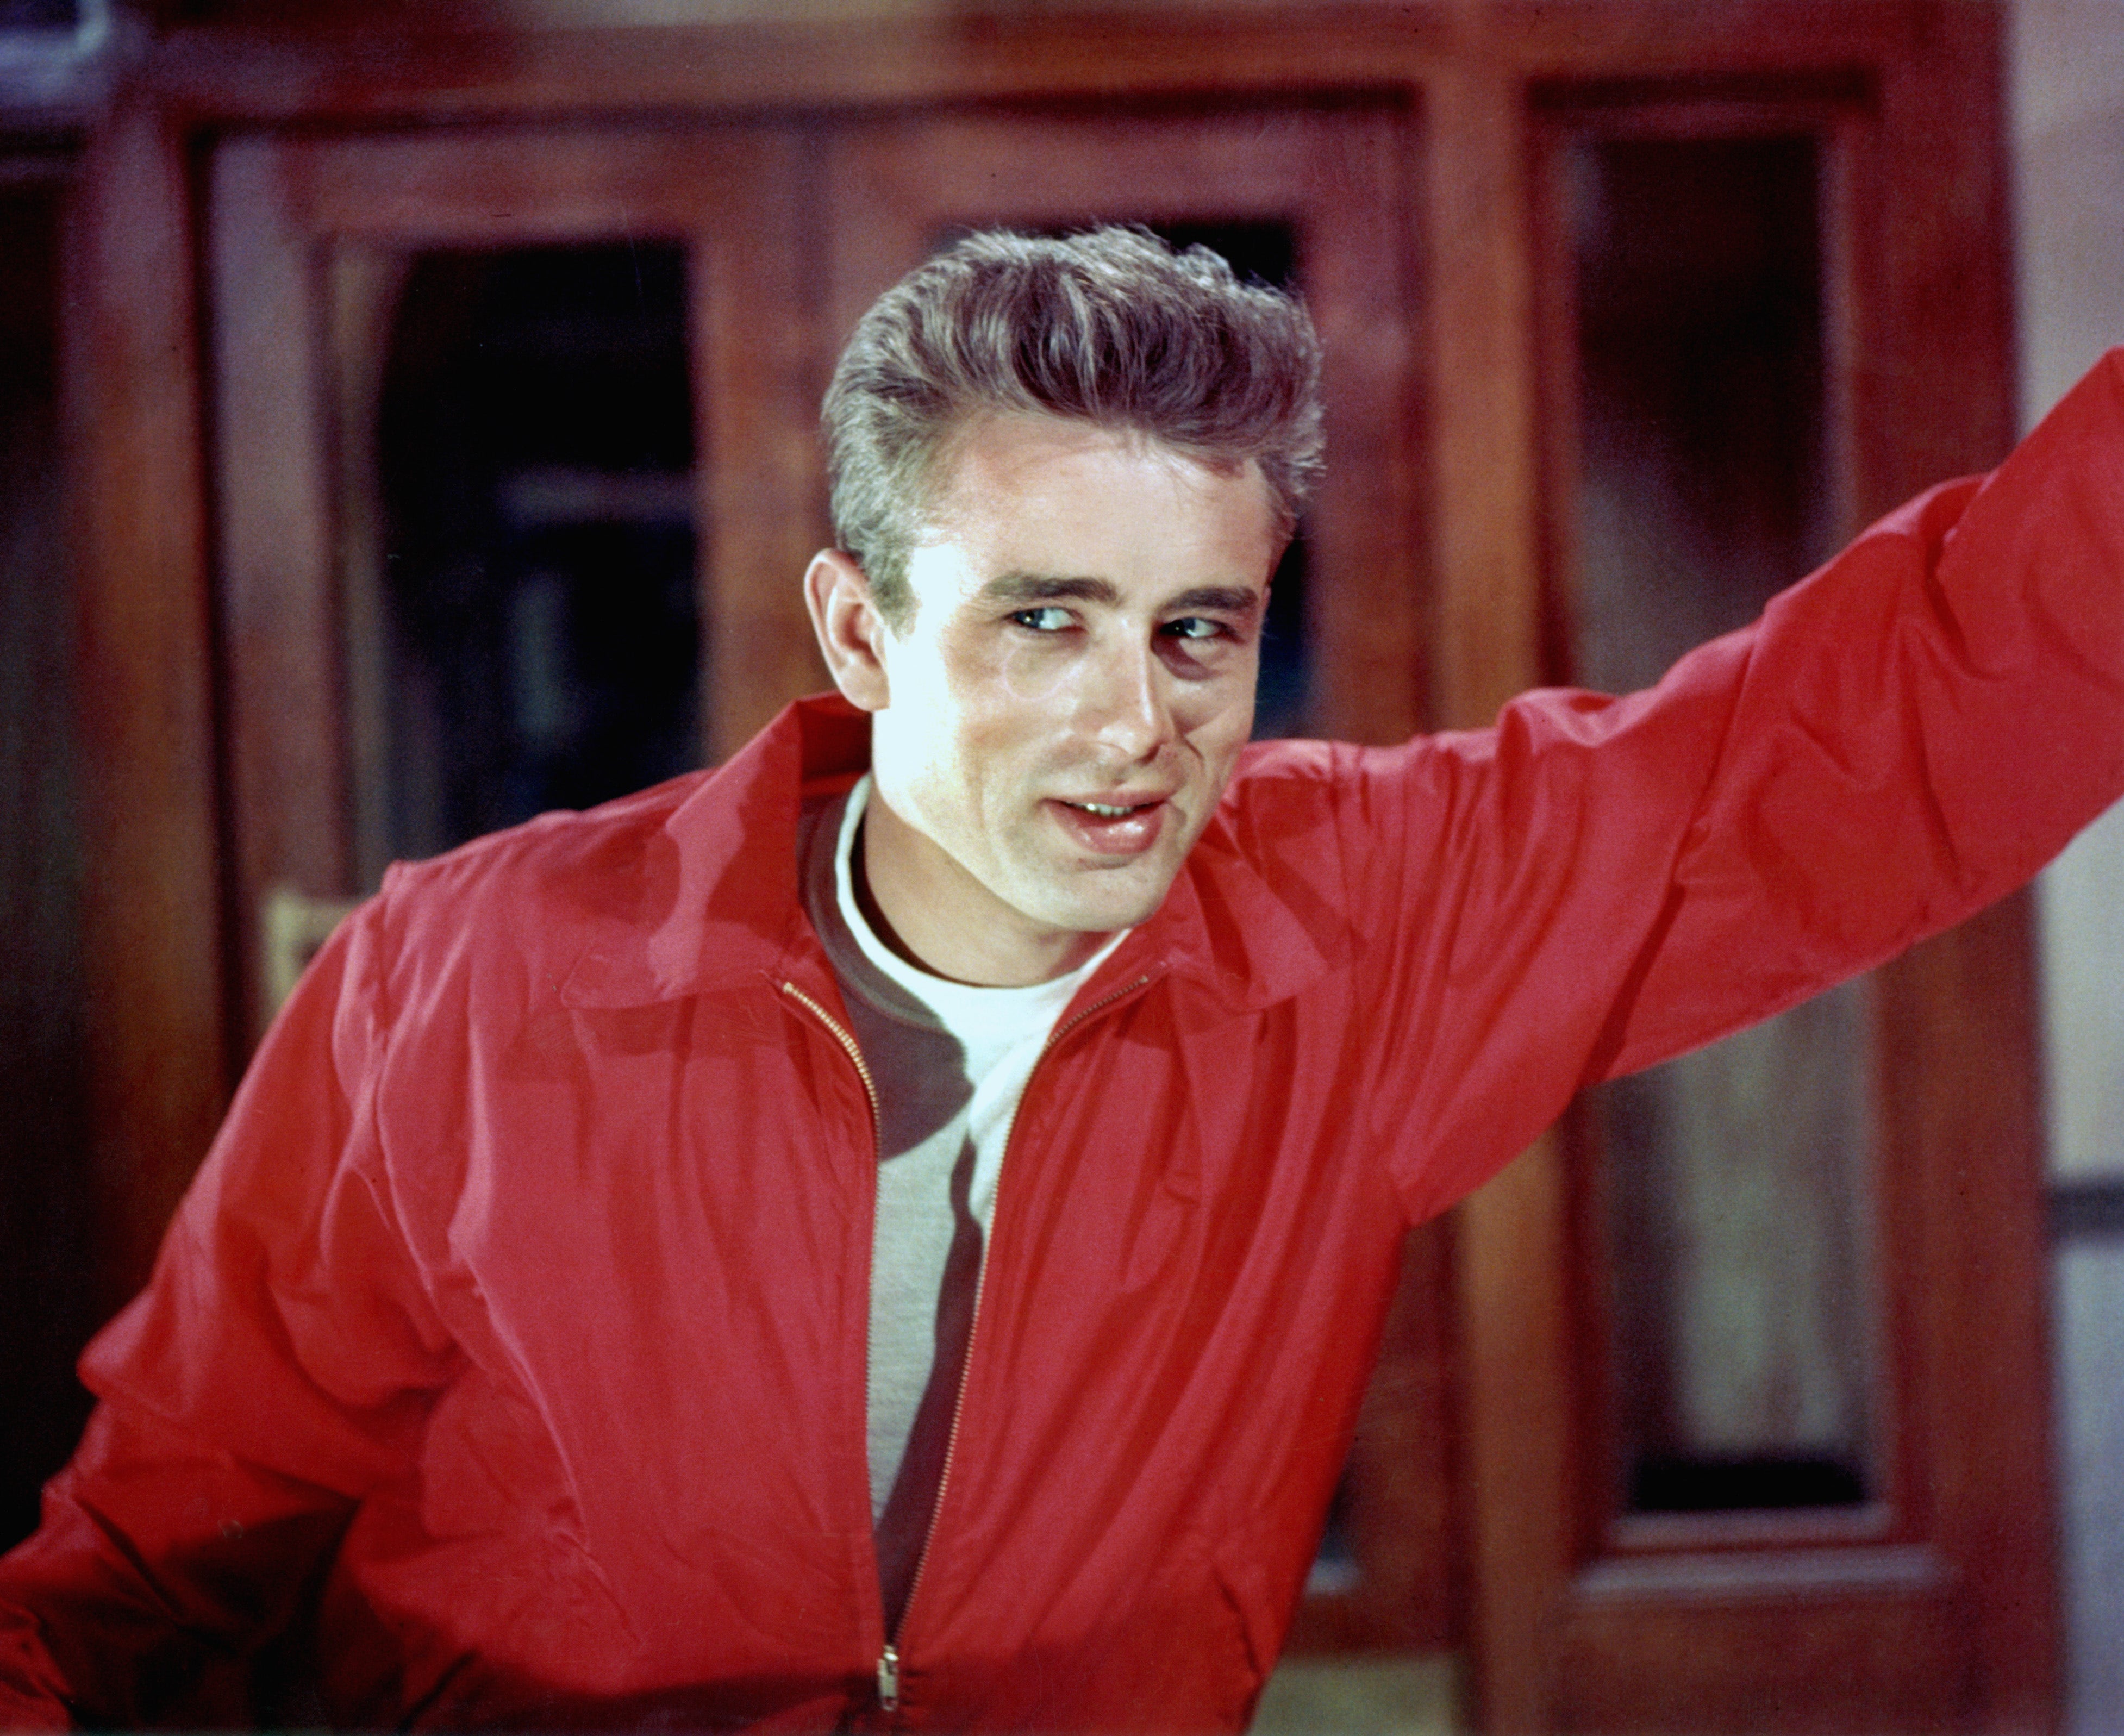 James Dean reportedly appearing in new film with AI, experts weigh in ...